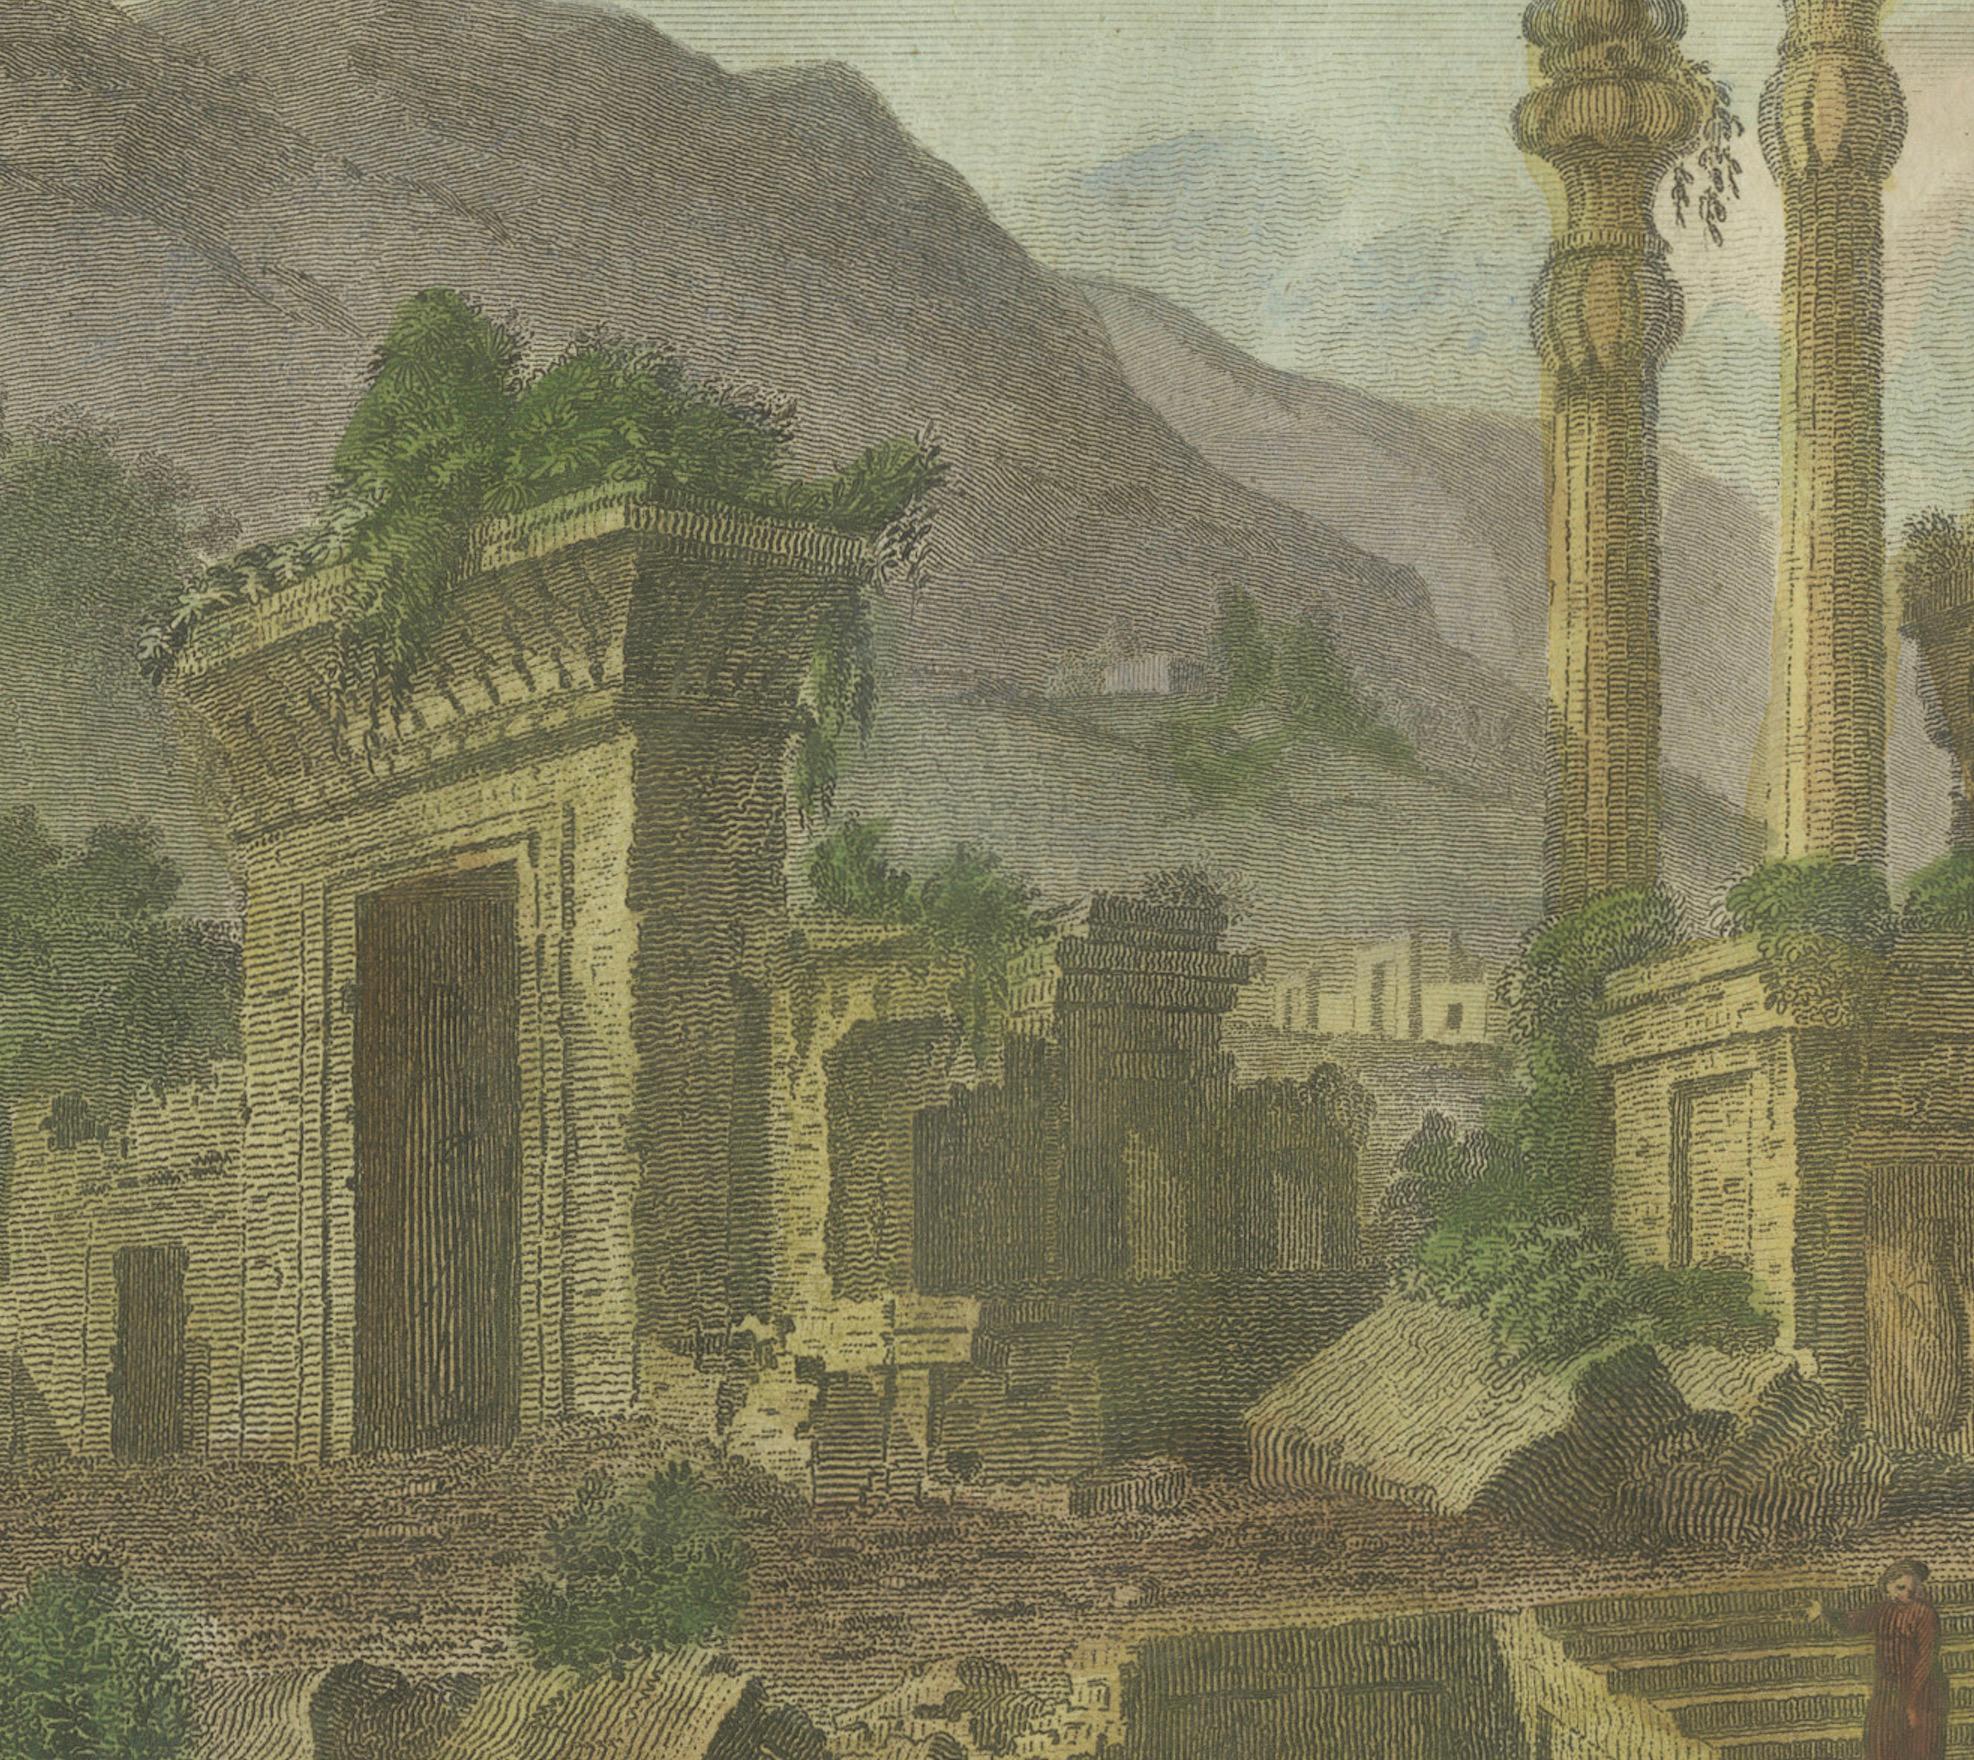 Engraved Colored Engraving of the Ancient Ruins of Persepolis in Persia (Iran), 1782  For Sale